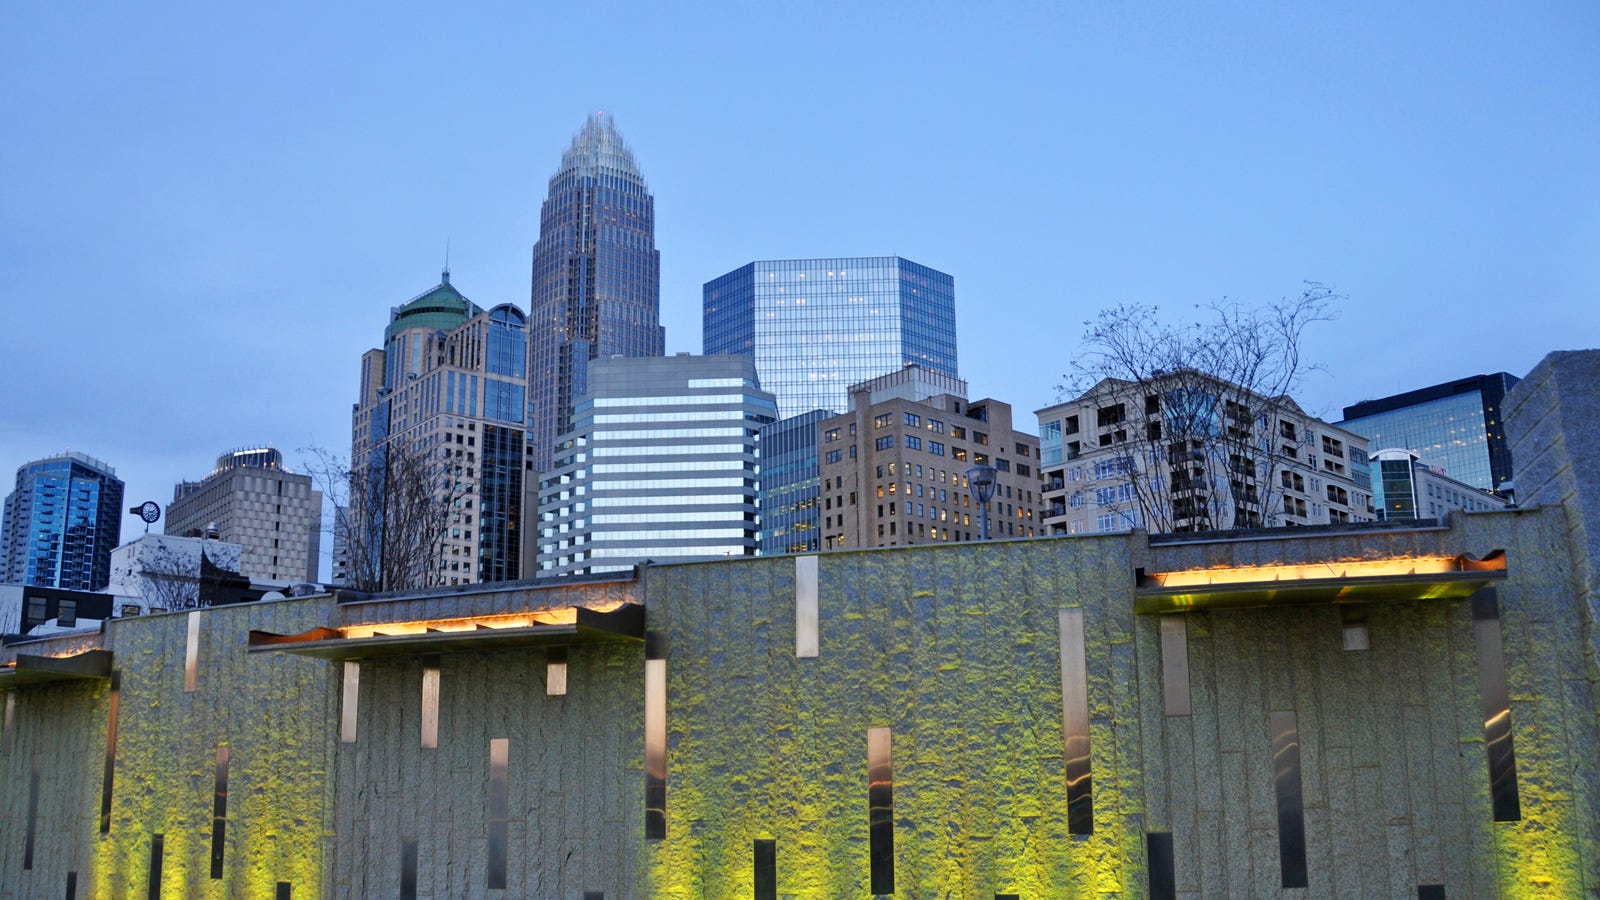 The Best Charlotte, NC Travel Tips From Our Readers